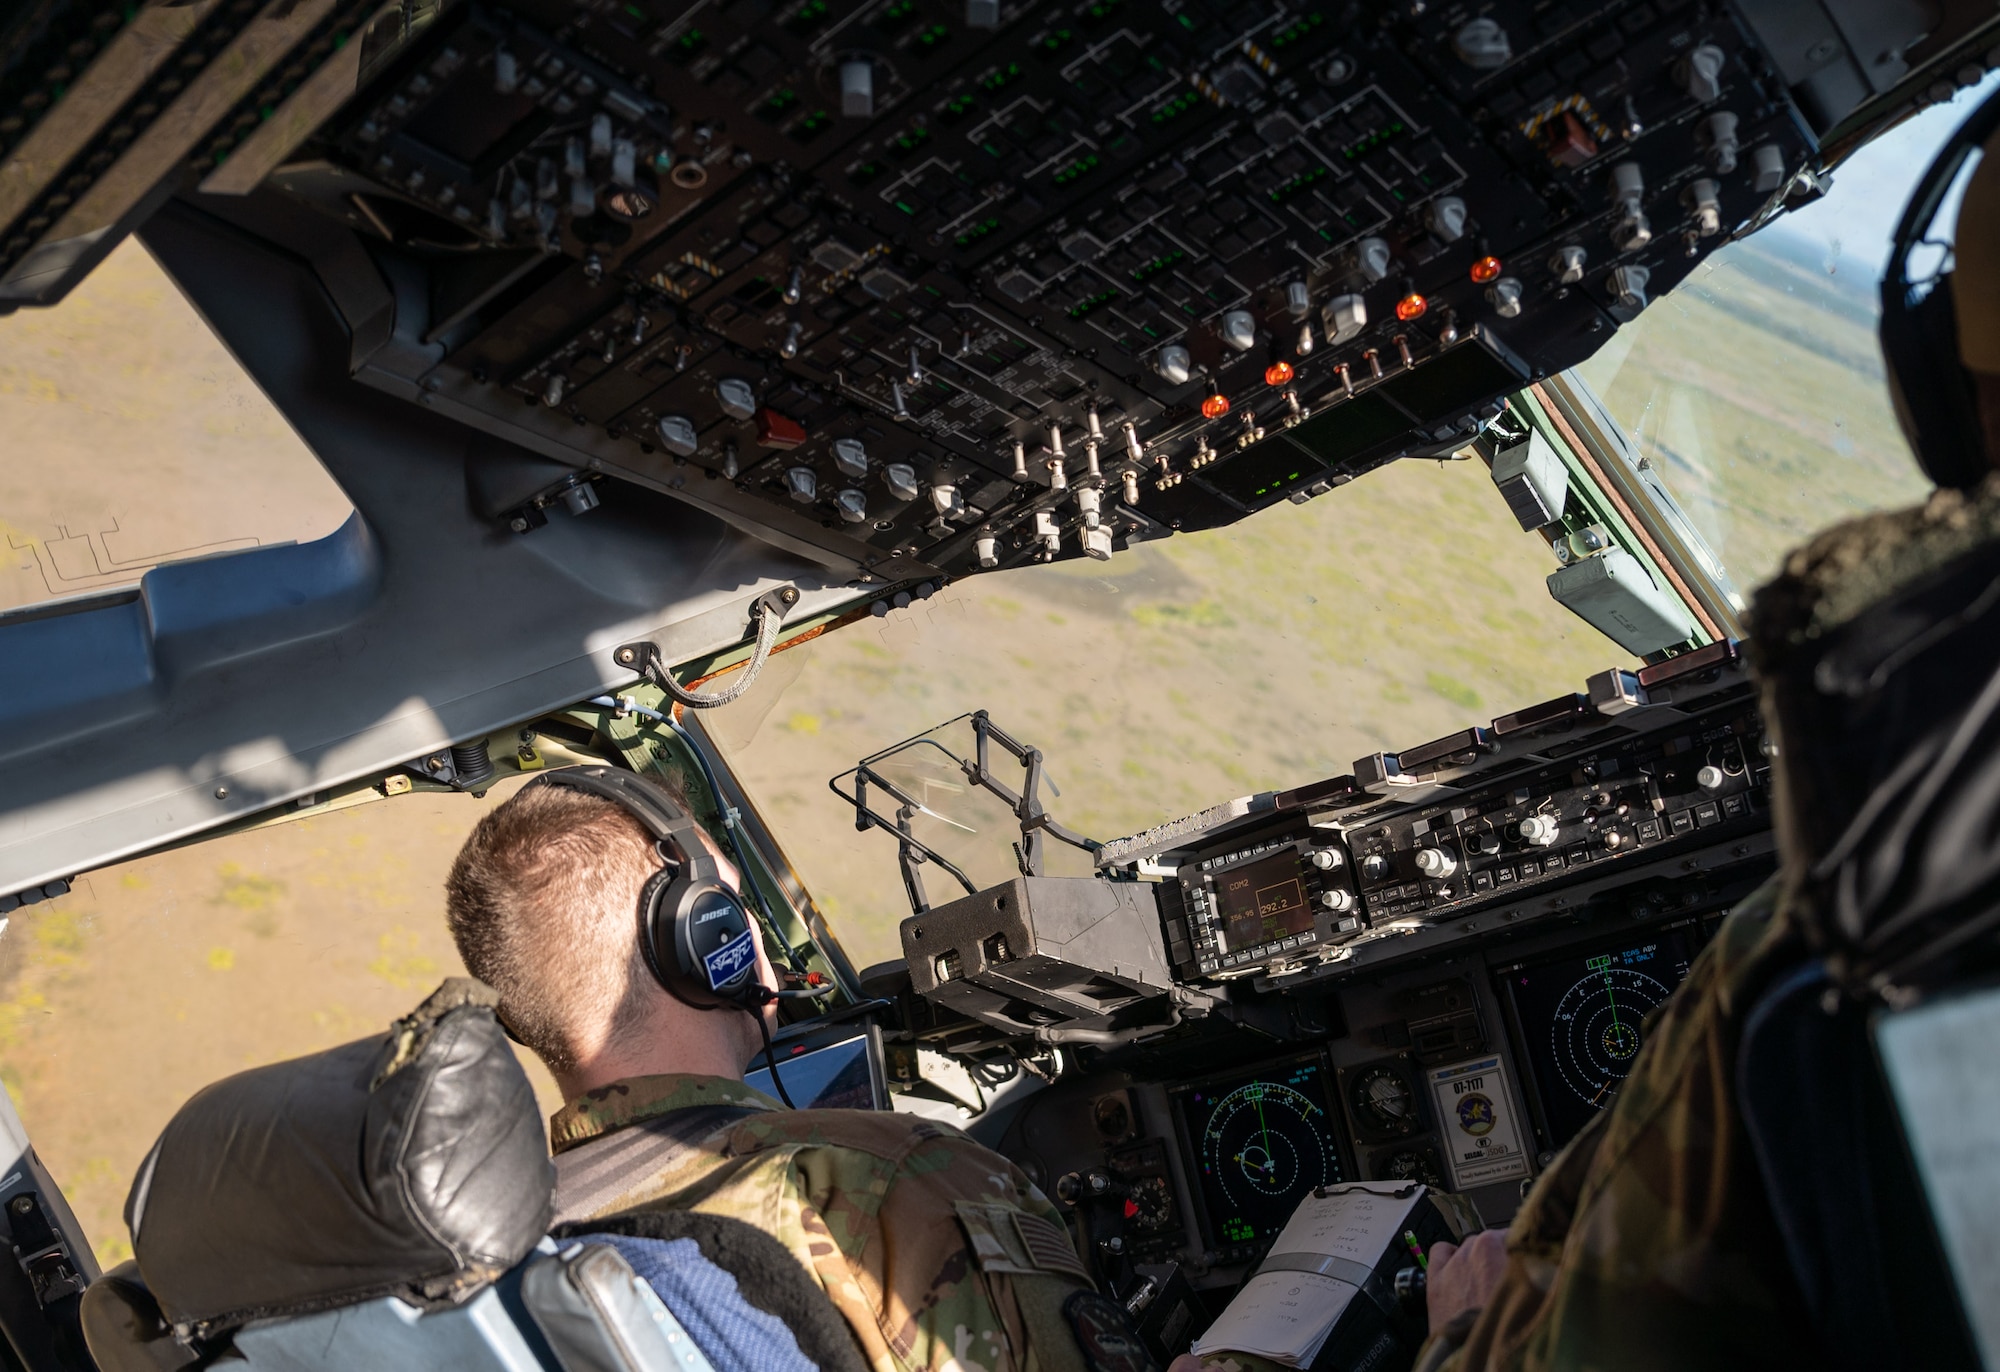 First Lt. August Hein (left), and Capt. Reed Fleming, both 3rd Airlift Squadron pilots, fly a C-17 Globemaster III over Florida during exercise Mosaic Tiger Feb. 25, 2021. Airmen from Dover AFB and Joint Base McGuire-Dix Lakehurst, New Jersey participated in the exercise, led by the 23rd Wing at Moody AFB, Georgia. The exercise tested agile combat employment, across multiple major commands, to build mission-essential skills. (U.S. Air Force photo by Airman 1st Class Faith Schaefer)